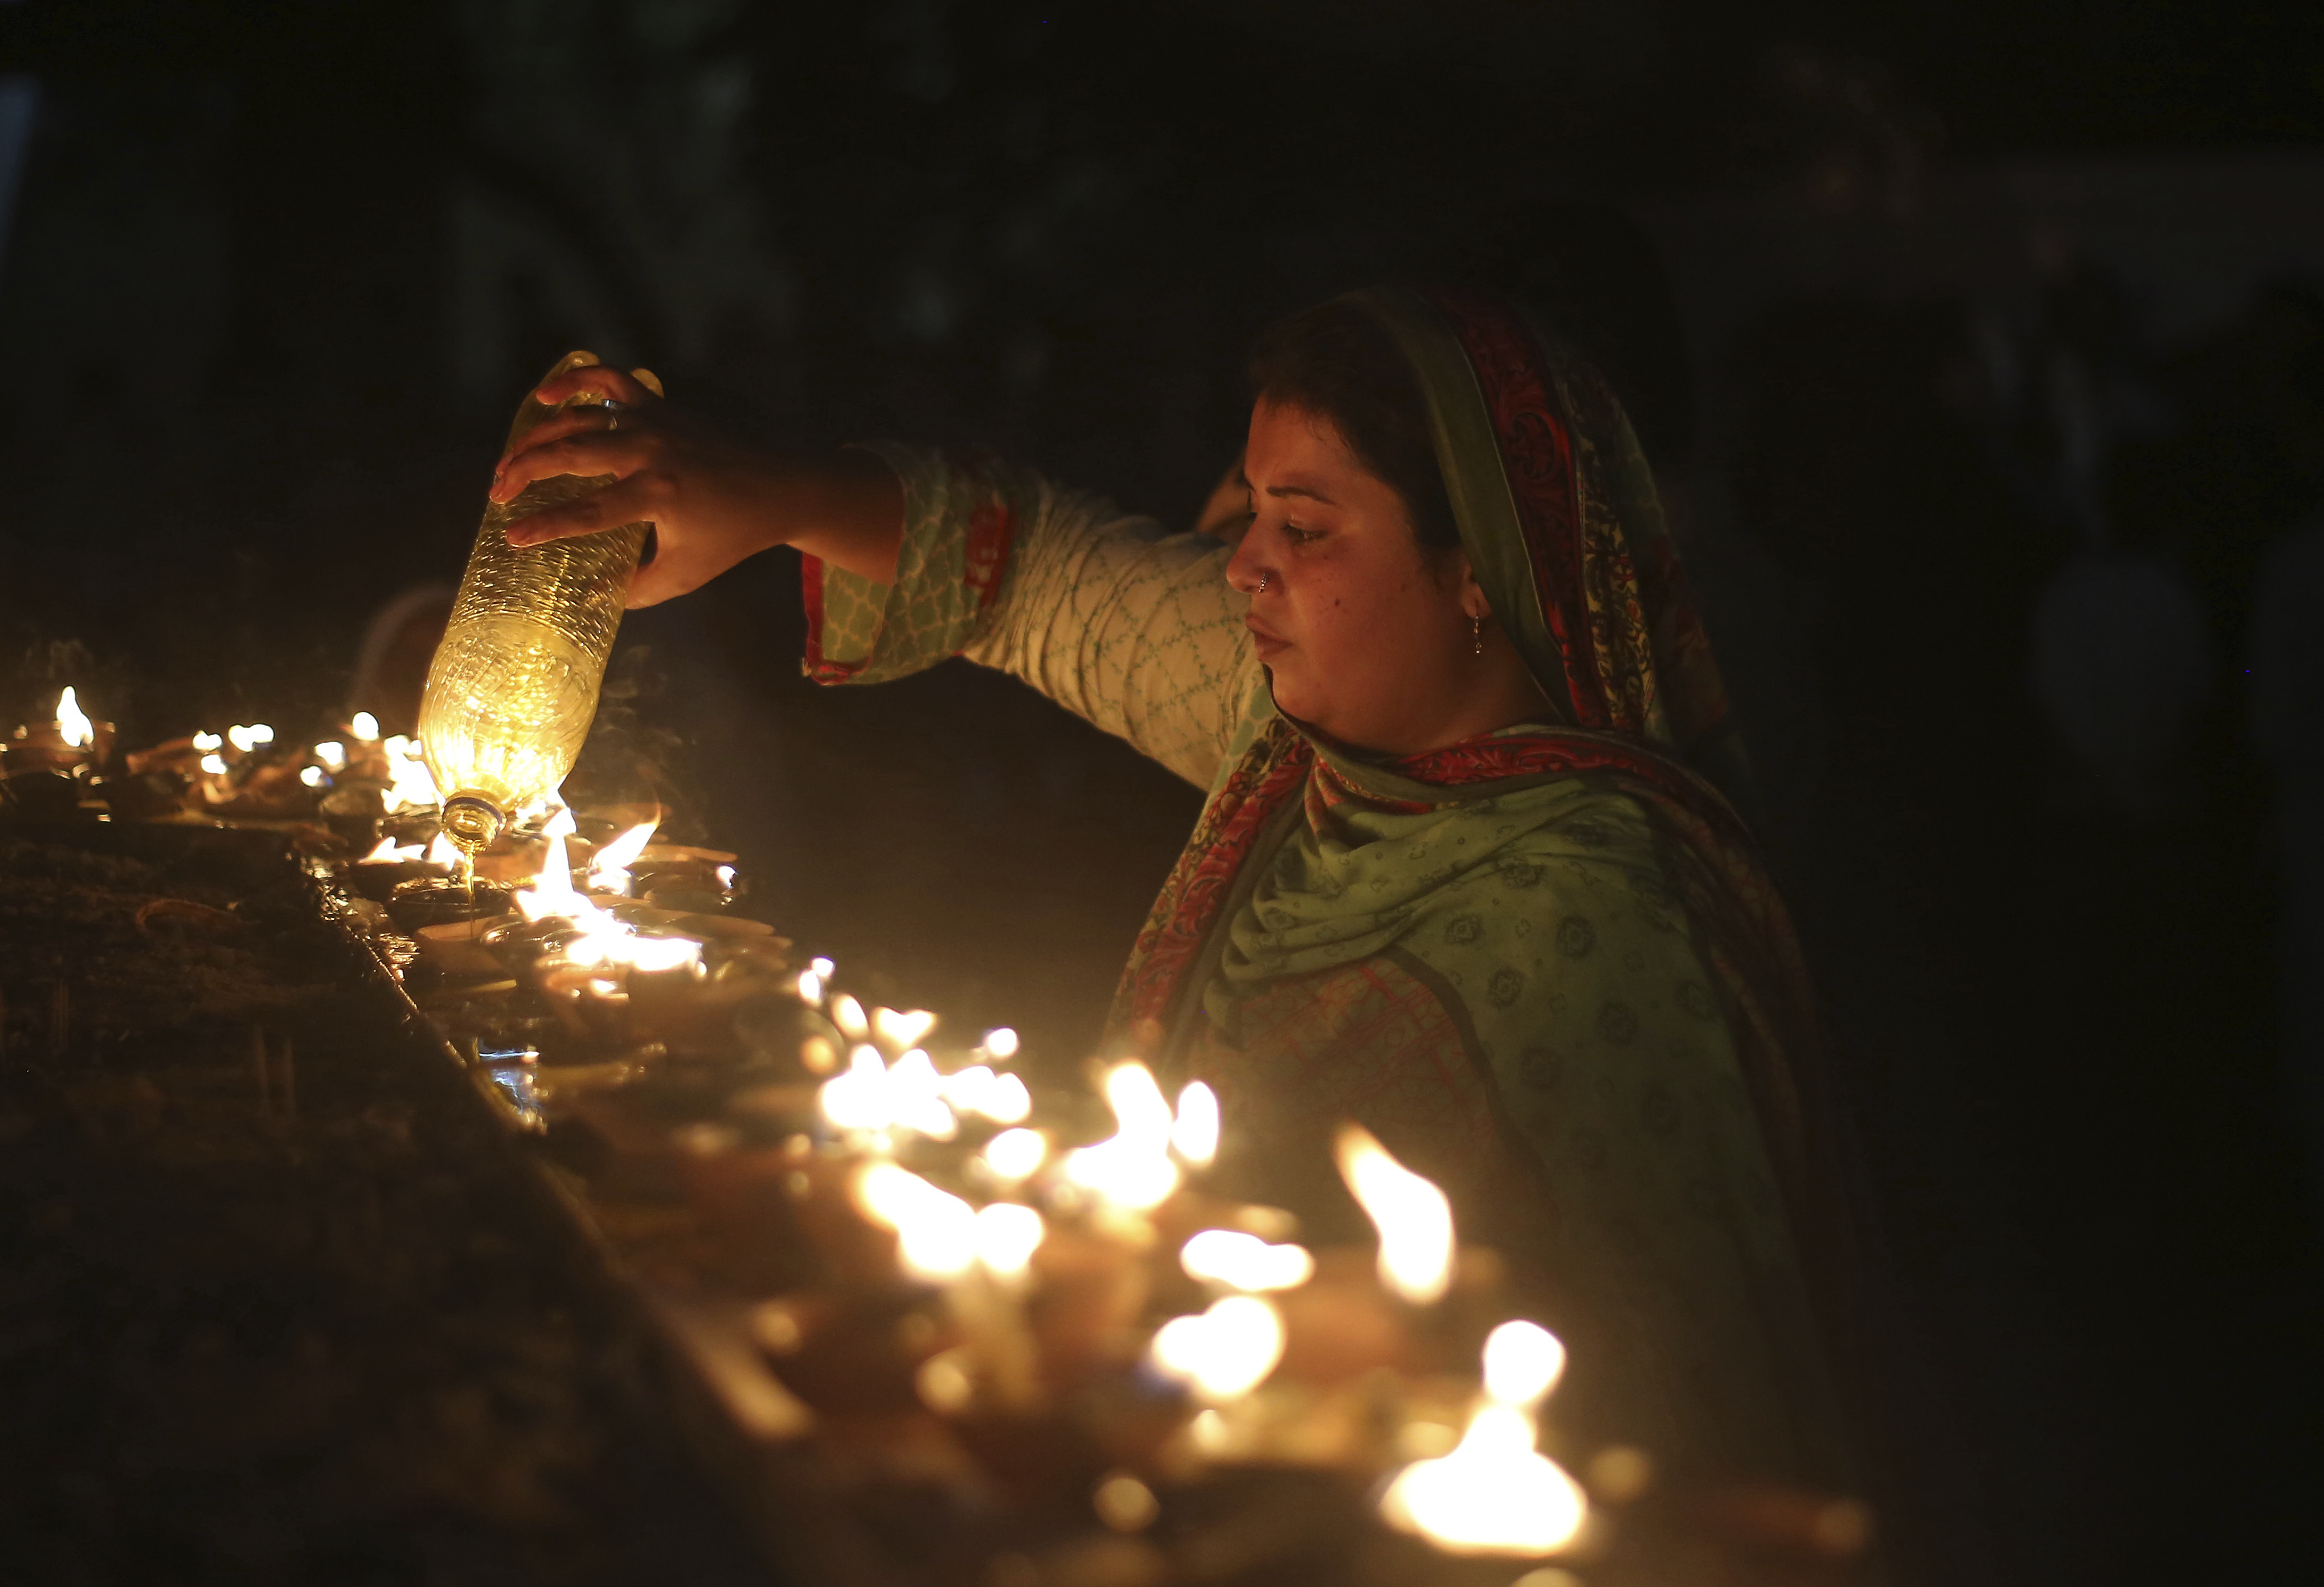 A Pakistani pilgrim pours oil in earthen lamps at a shrine in Lahore, Pakistan, Thursday, March 28, 2019.  People traditionally visit shrines on Thursdays and Fridays to light oil lamps, incense sticks and pray to get their wishes fulfilled. (K.M. Chaudhry)